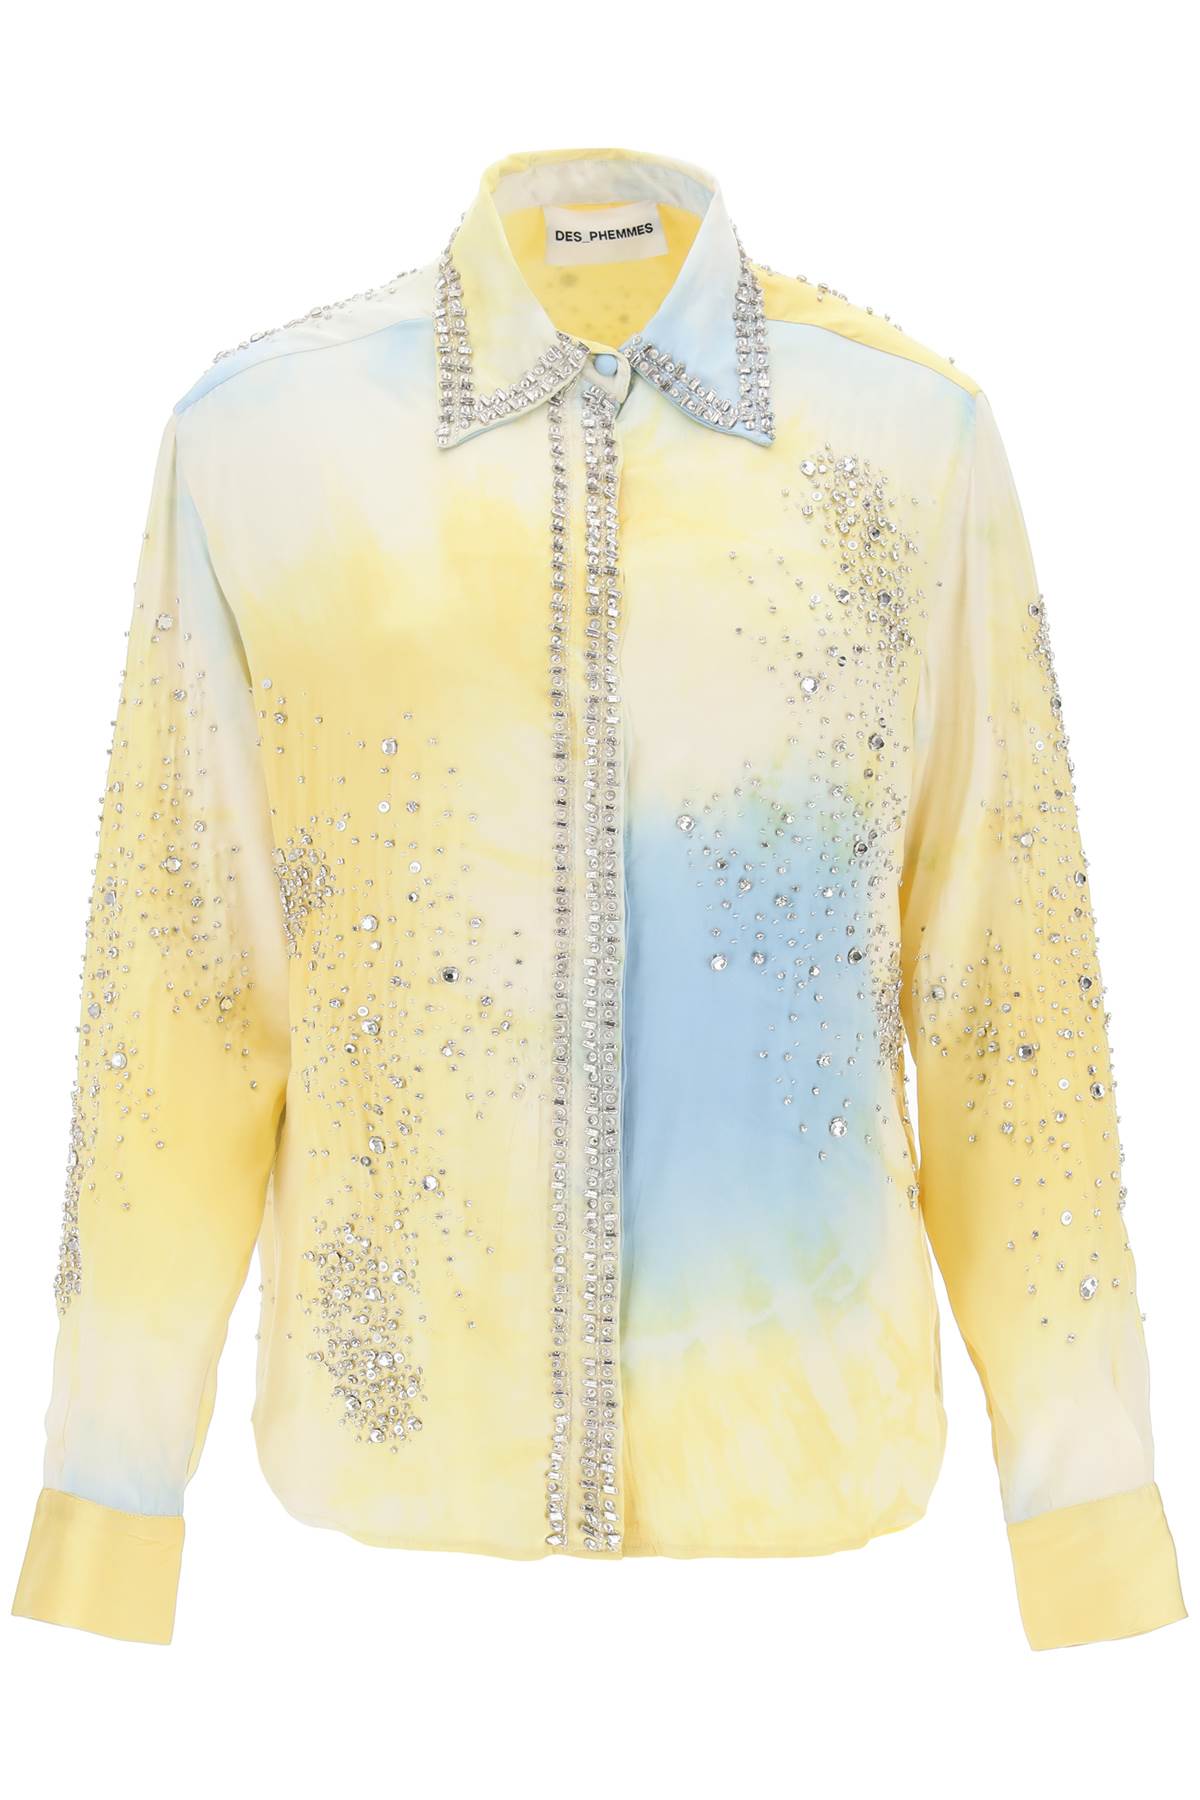 Shop Des Phemmes Silk Satin Shirt With Tie Dye Effect And Appliques In Light Blue, Yellow